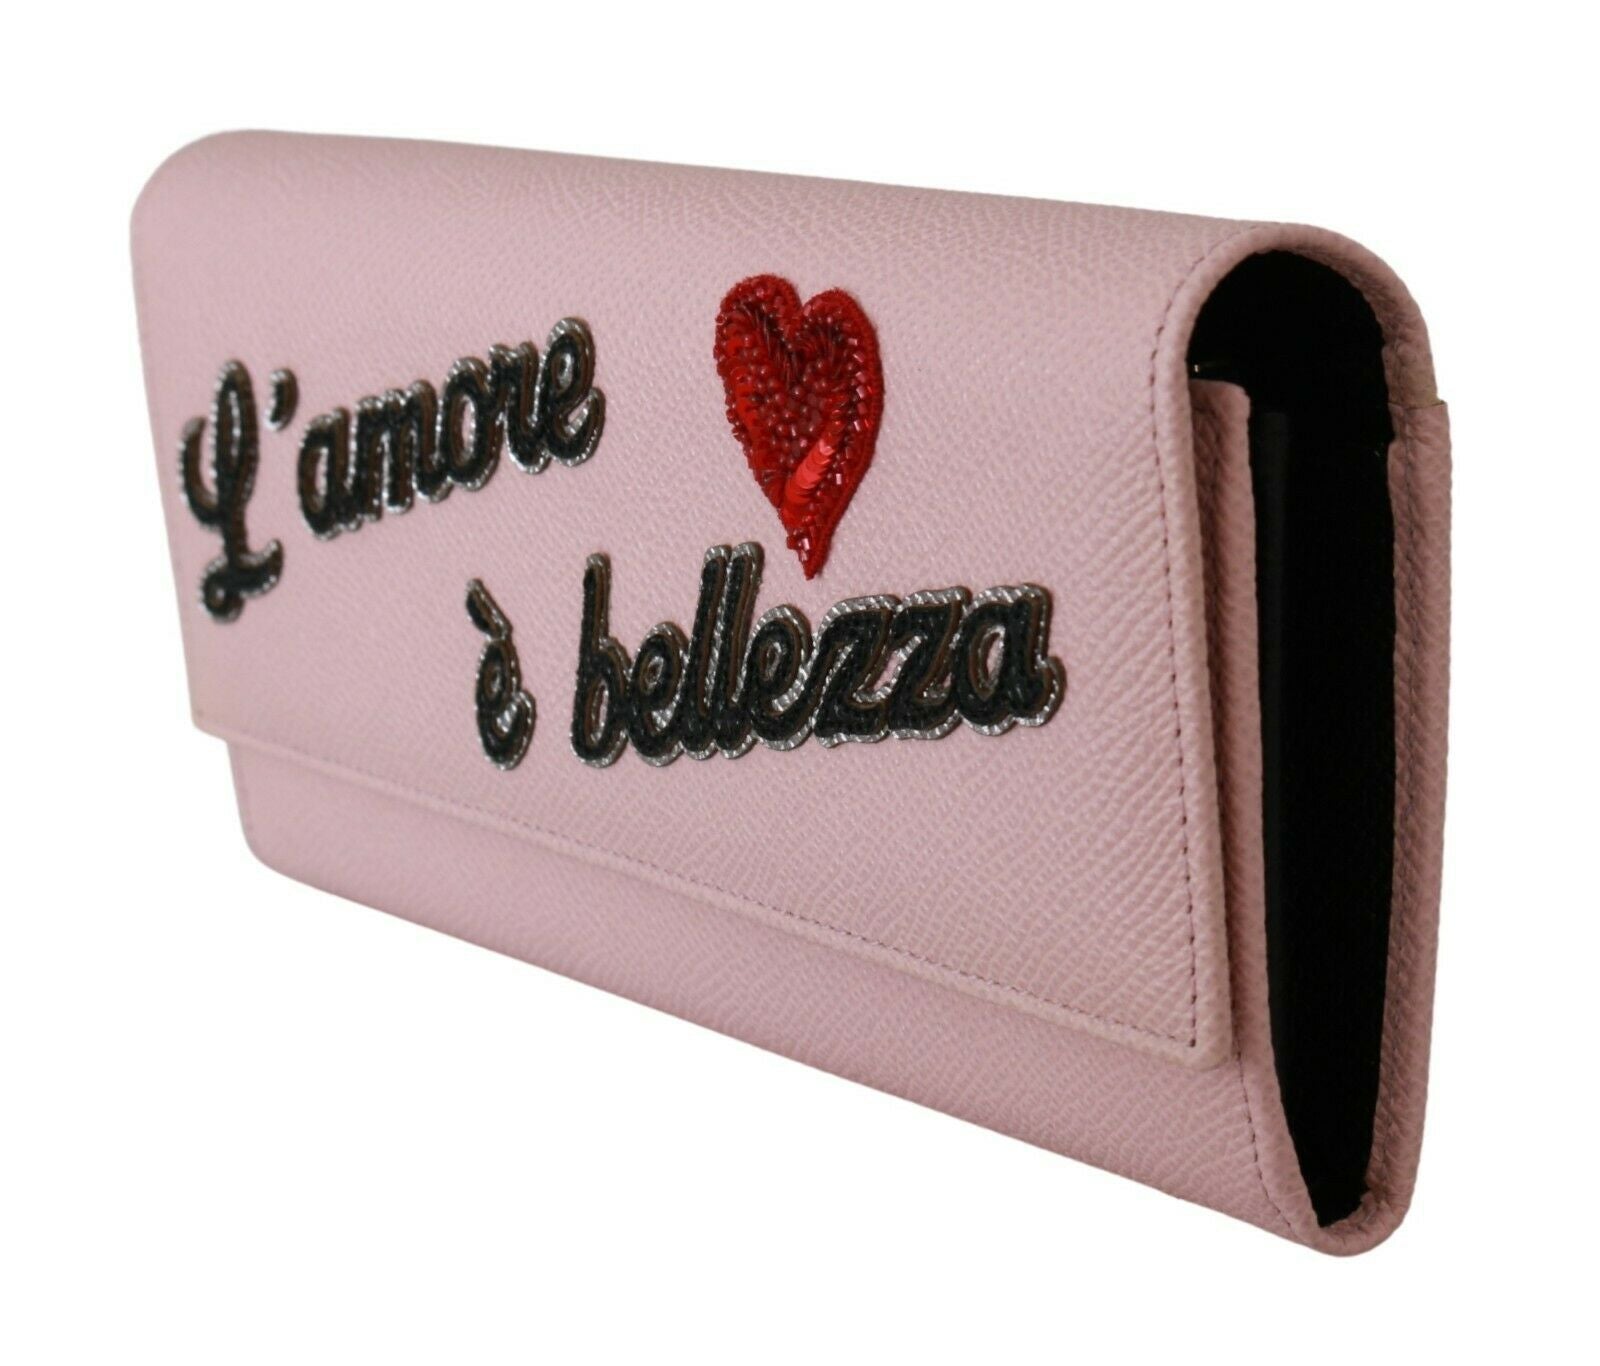 Pink Leather L'amore Bifold Continental Clutch Wallet